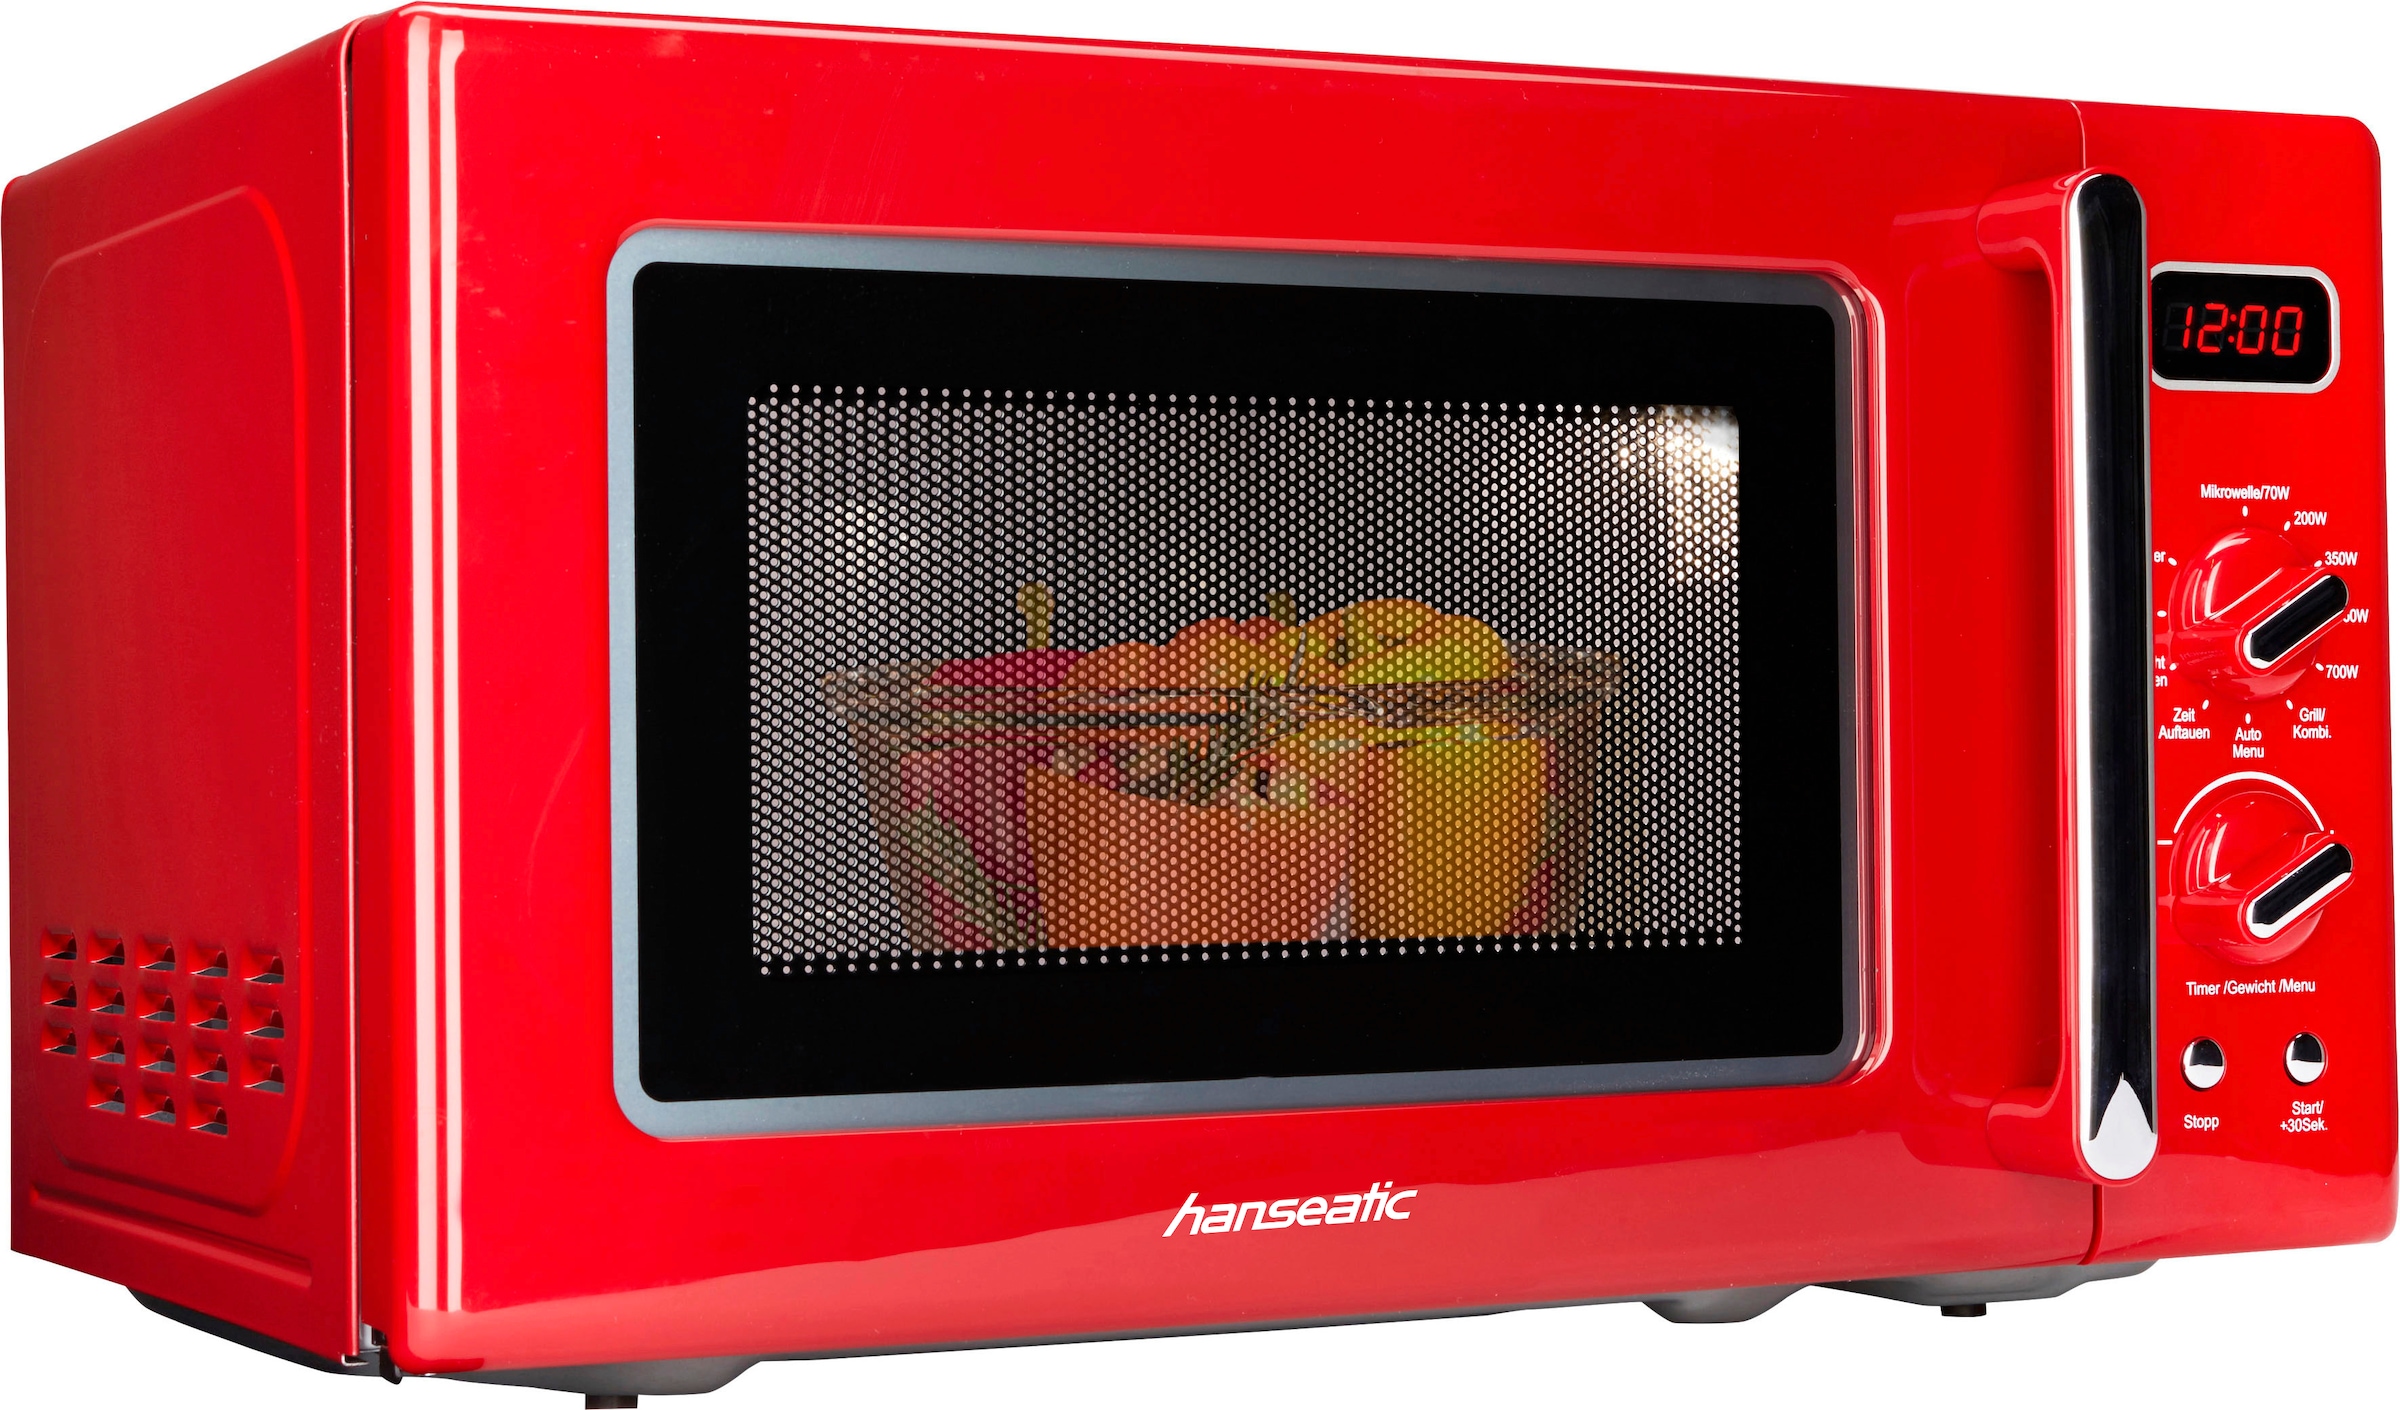 Hanseatic Mikrowelle »AG720CE6-PM«, Grill-Mikrowelle